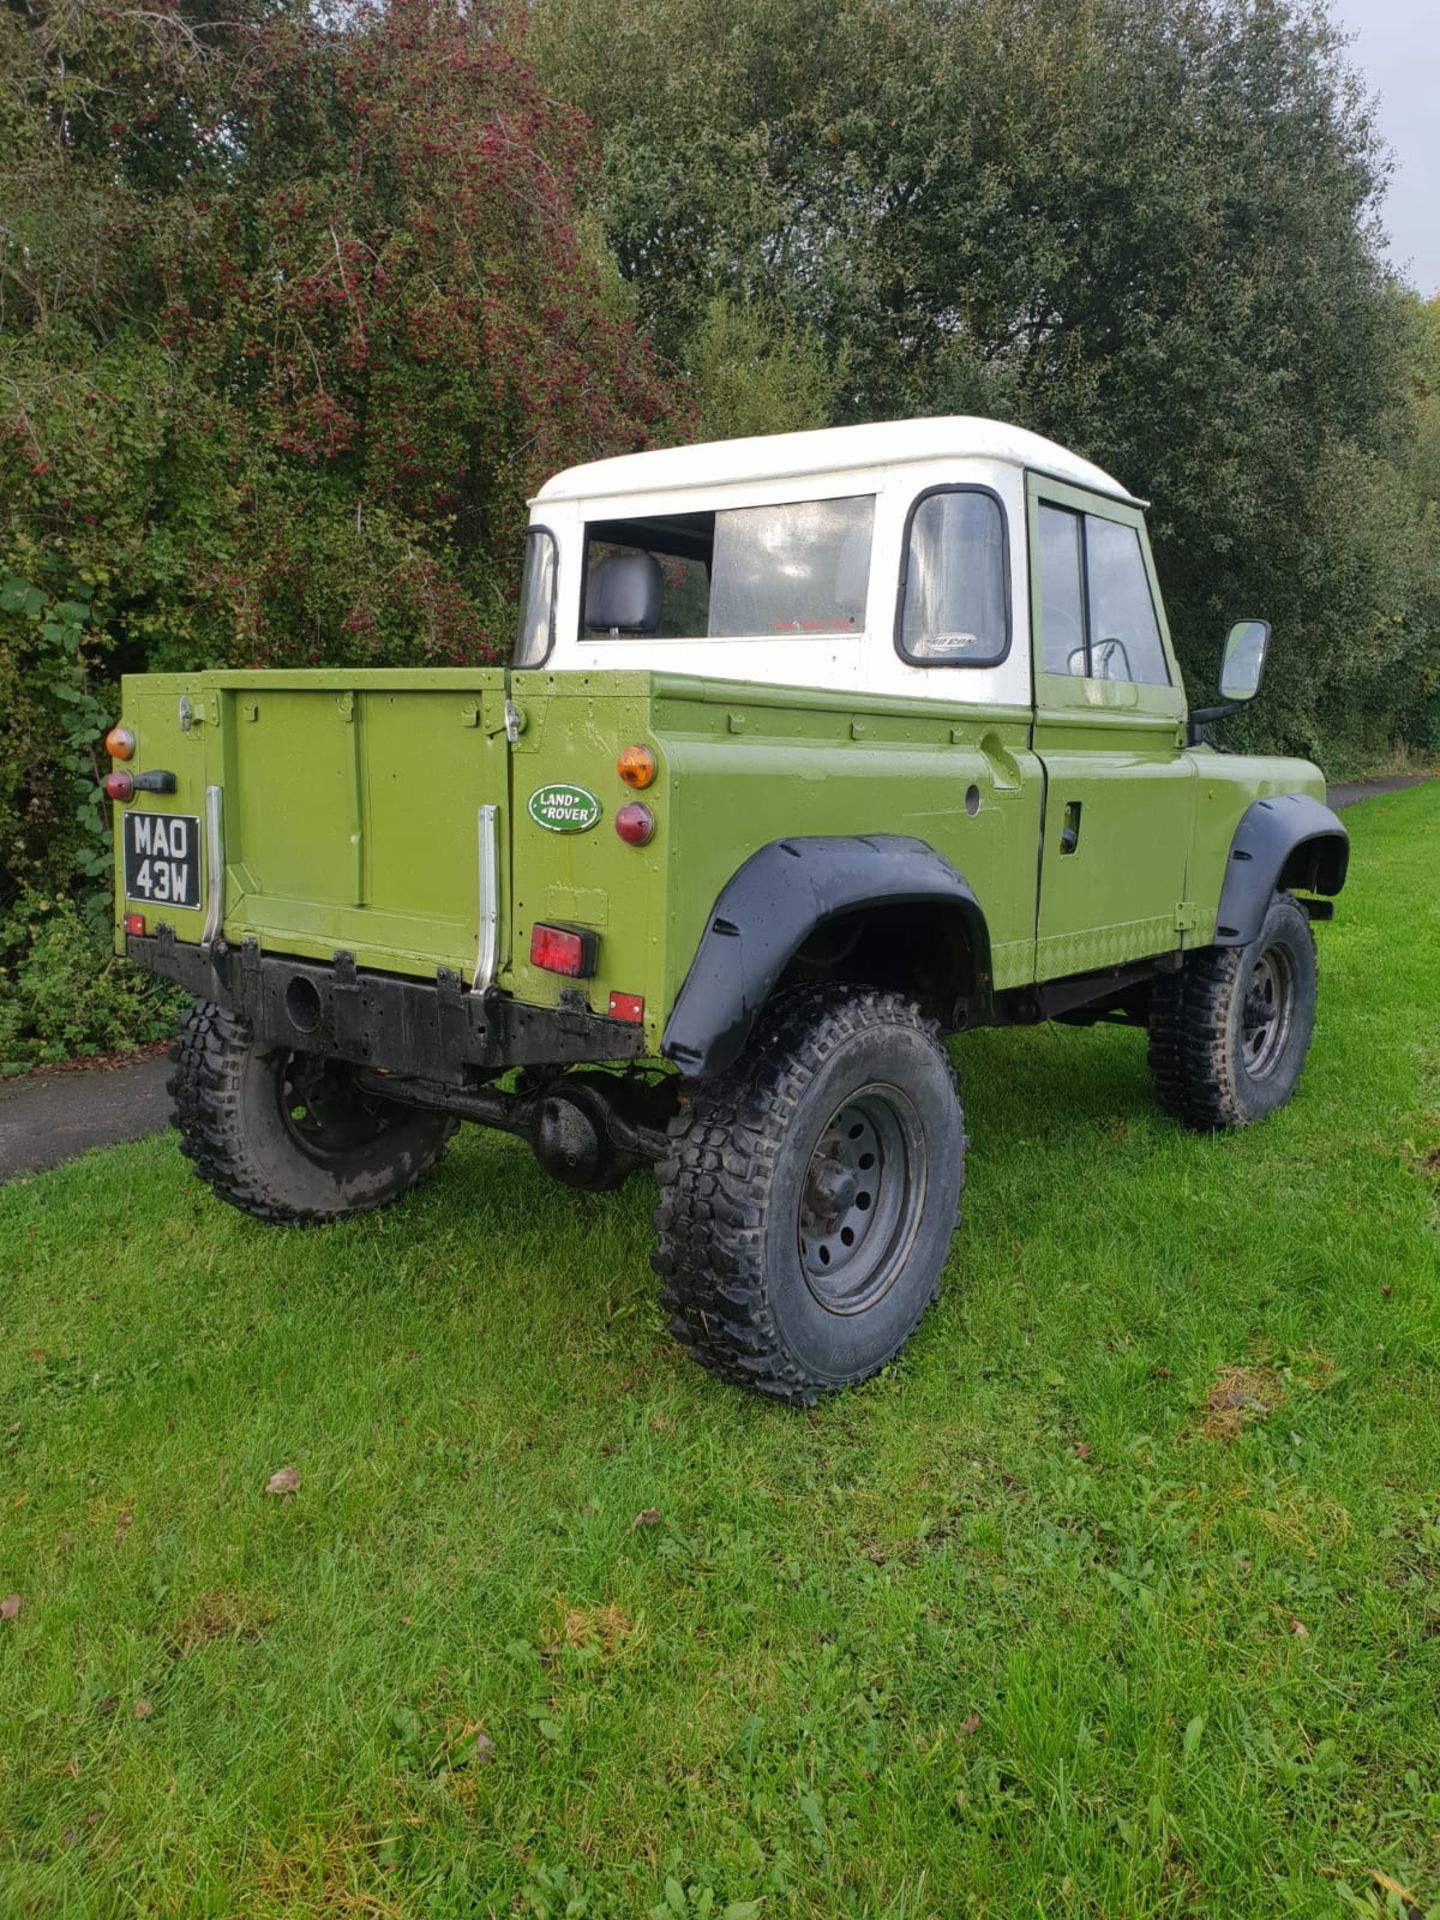 1981 LAND ROVER DEFENDER SERIES 3 TAX EXEMPT, FITTED WITH A 300TDI ENGINE, 4 INCH LIFT KIT *NO VAT* - Image 7 of 11